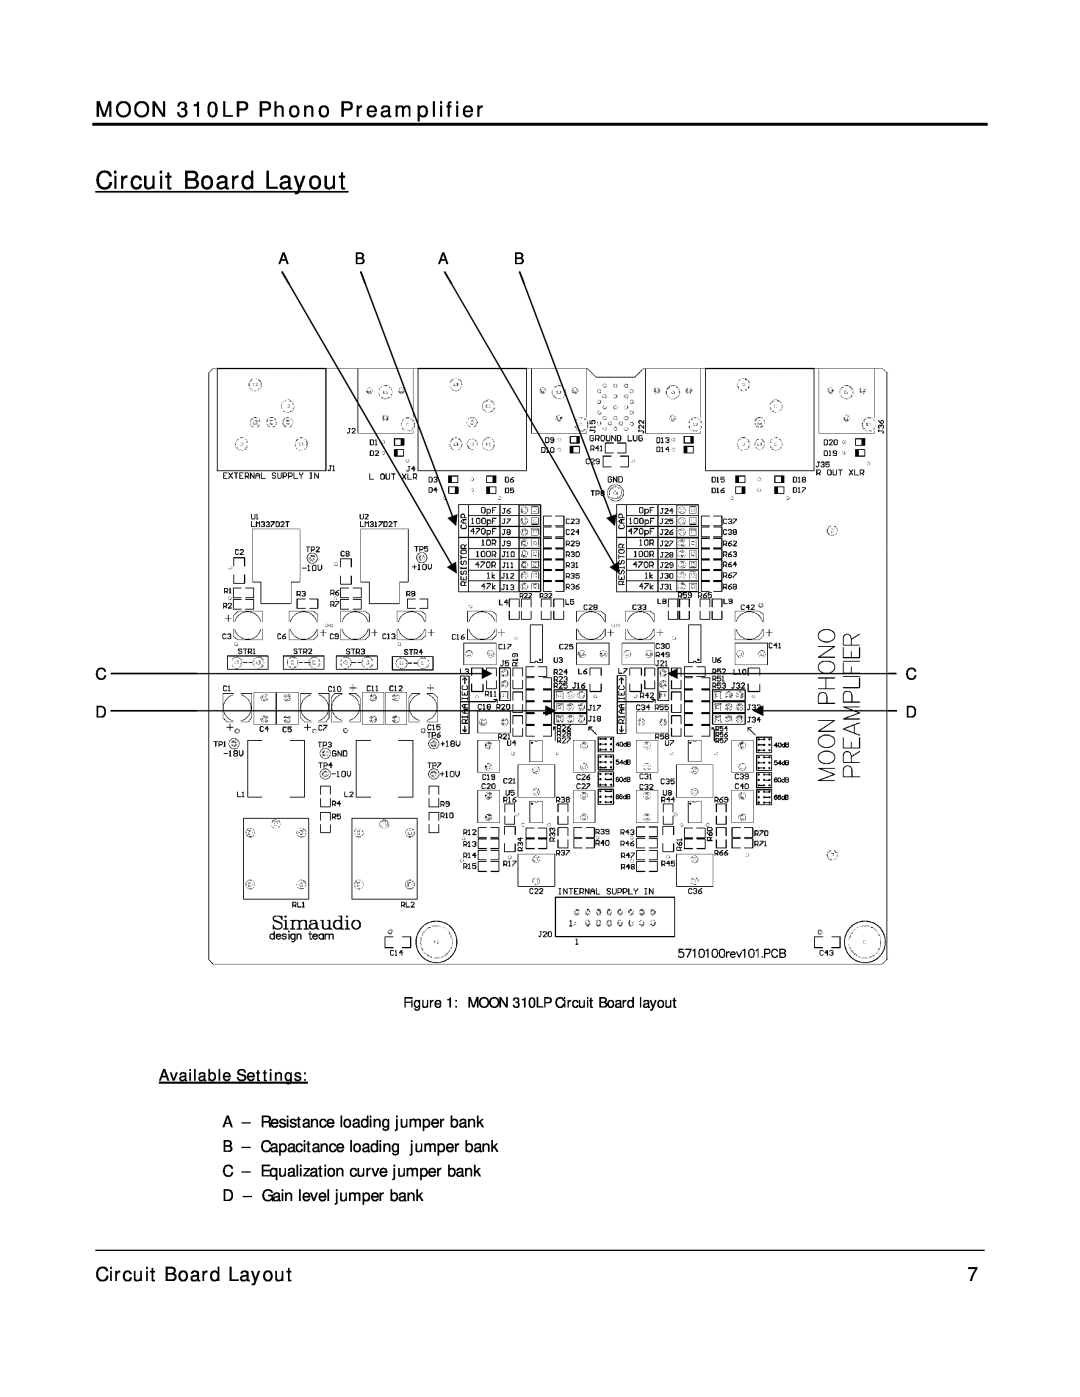 Simaudio 310 LP owner manual Circuit Board Layout, MOON 310LP Phono Preamplifier, A B A B C C D D, Available Settings 